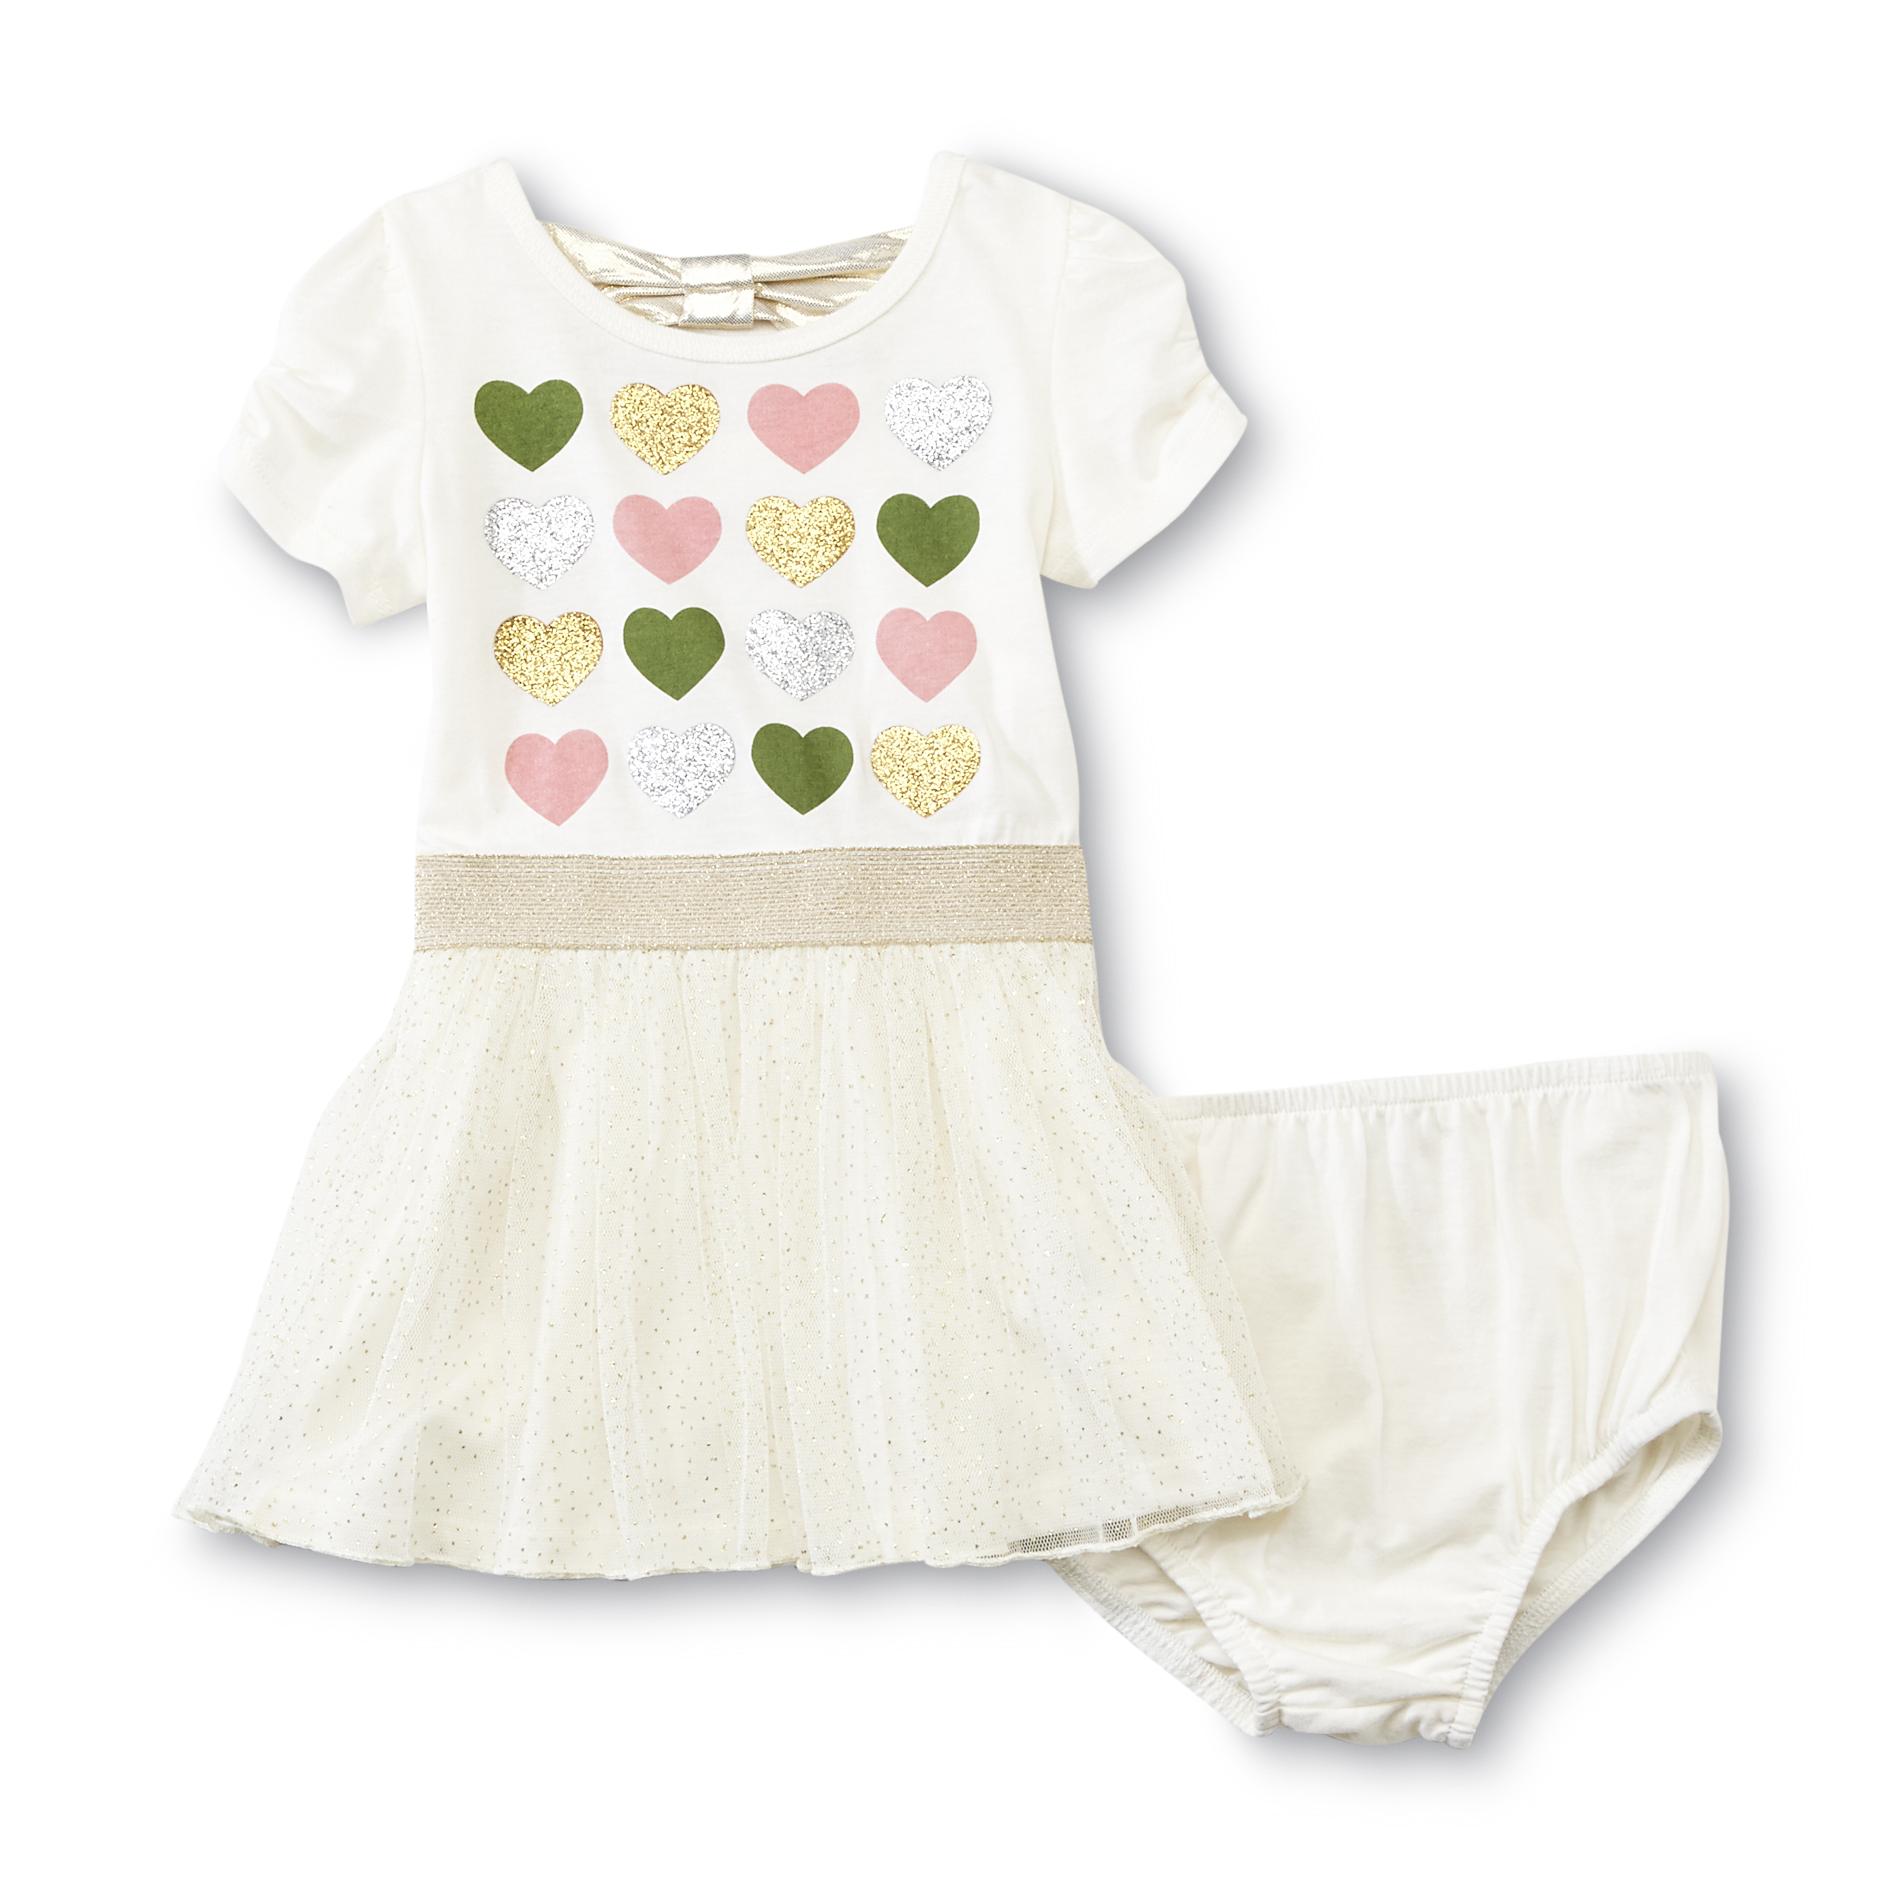 Piper Baby Infant & Toddler Girl's Graphic Tunic Top - Hearts